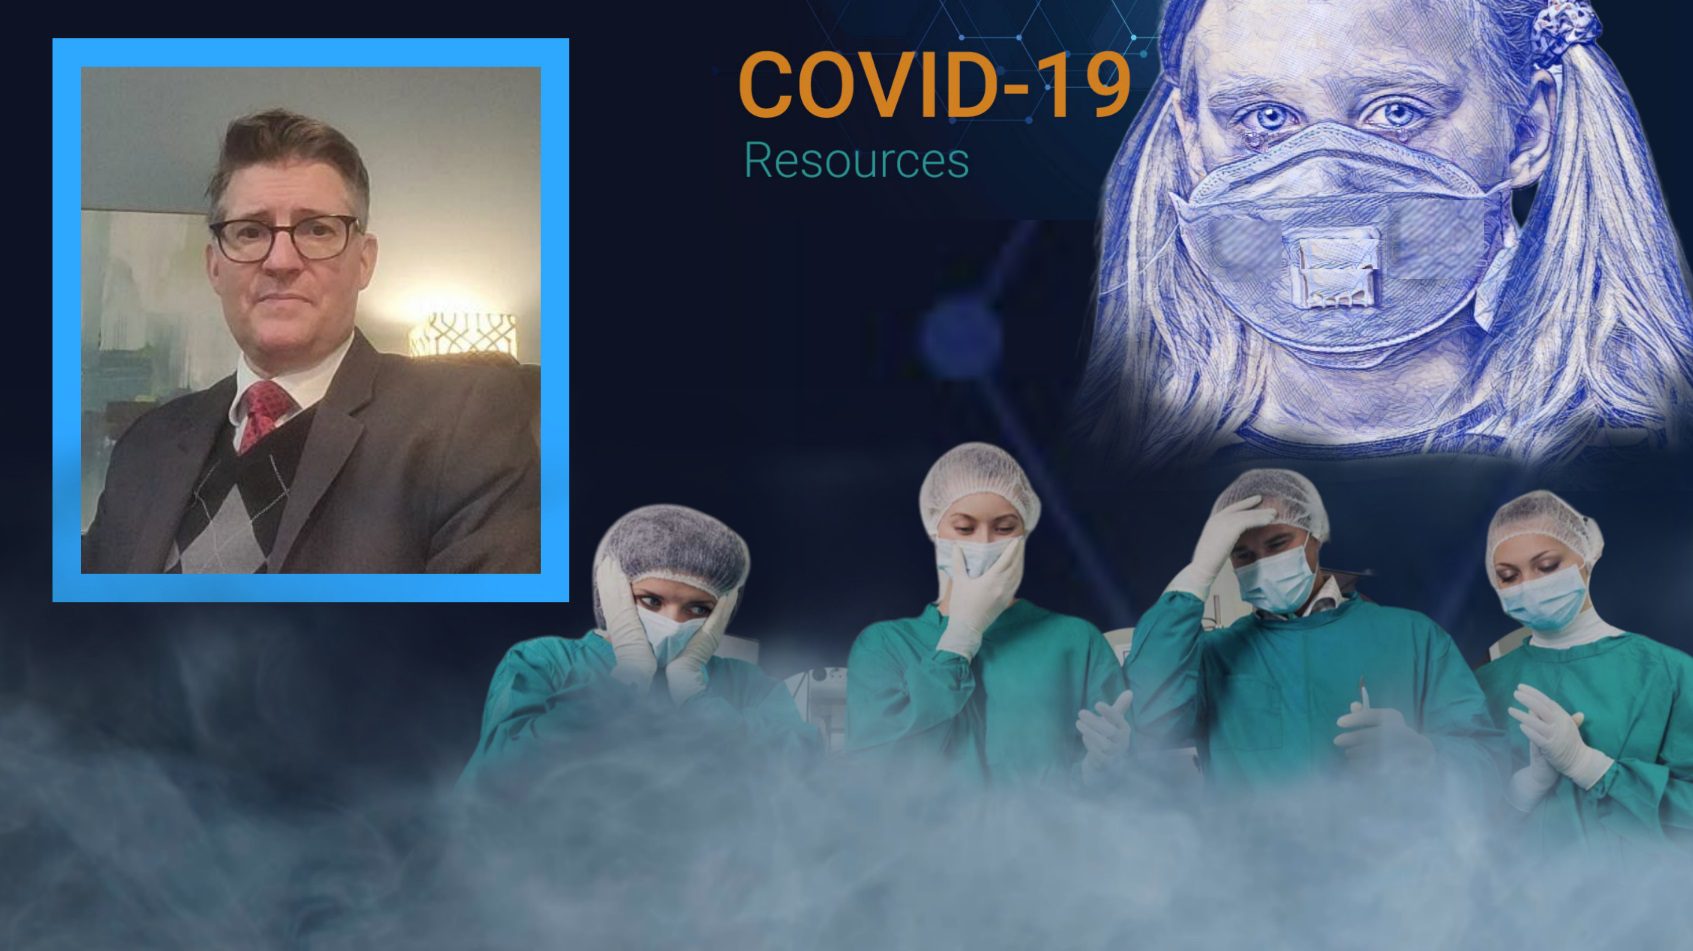 Physician Assistant Who Saved Hundreds Of COVID Patients From ‘Needlessly Dying In Hospitals’ Reveals Exactly Why His Medical License Is Suspended